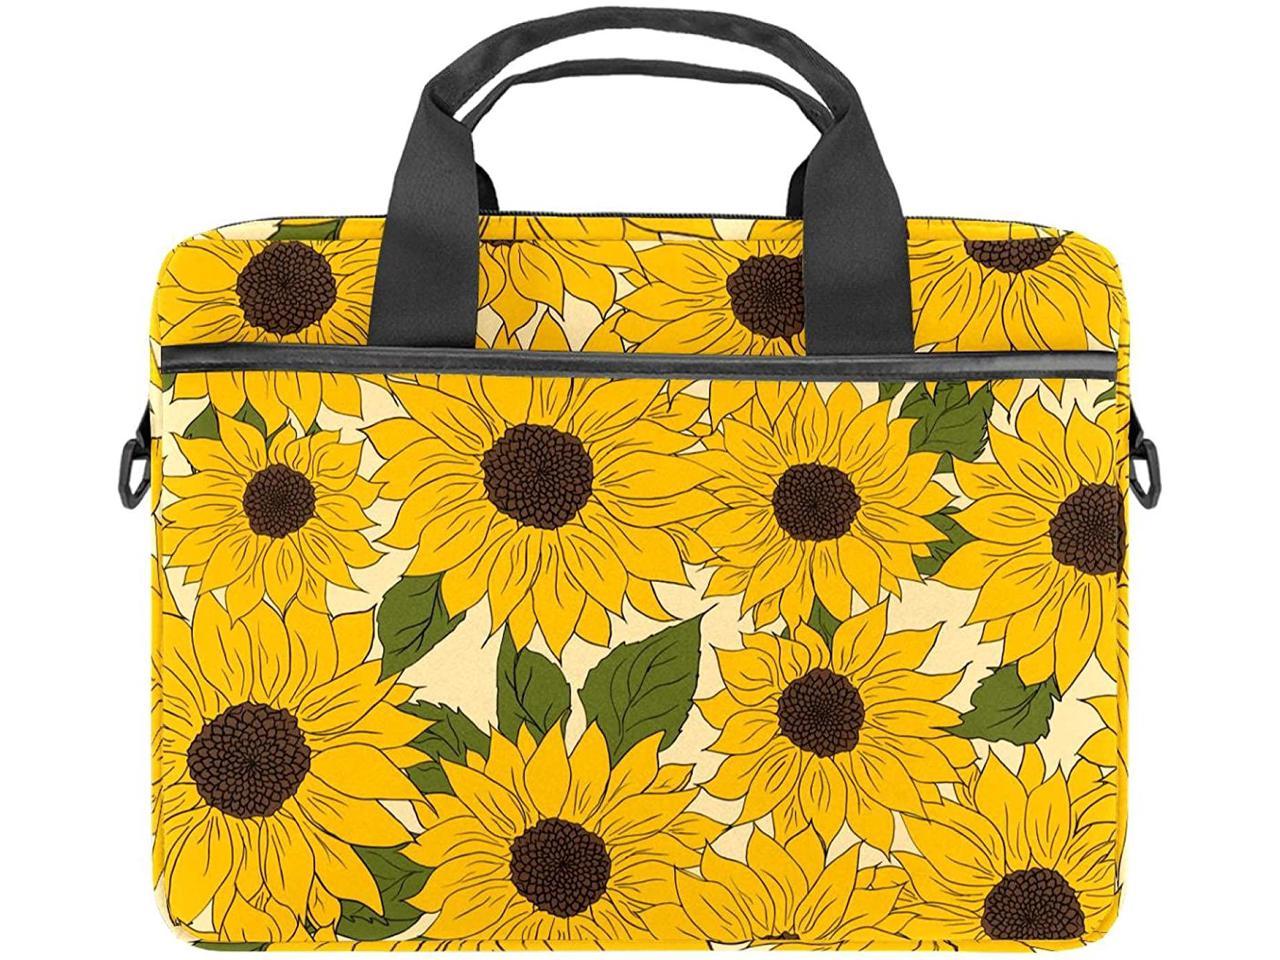 Travel Luggage Cover Botanicalbig Leaves Pattern Black Suitcase Protector 